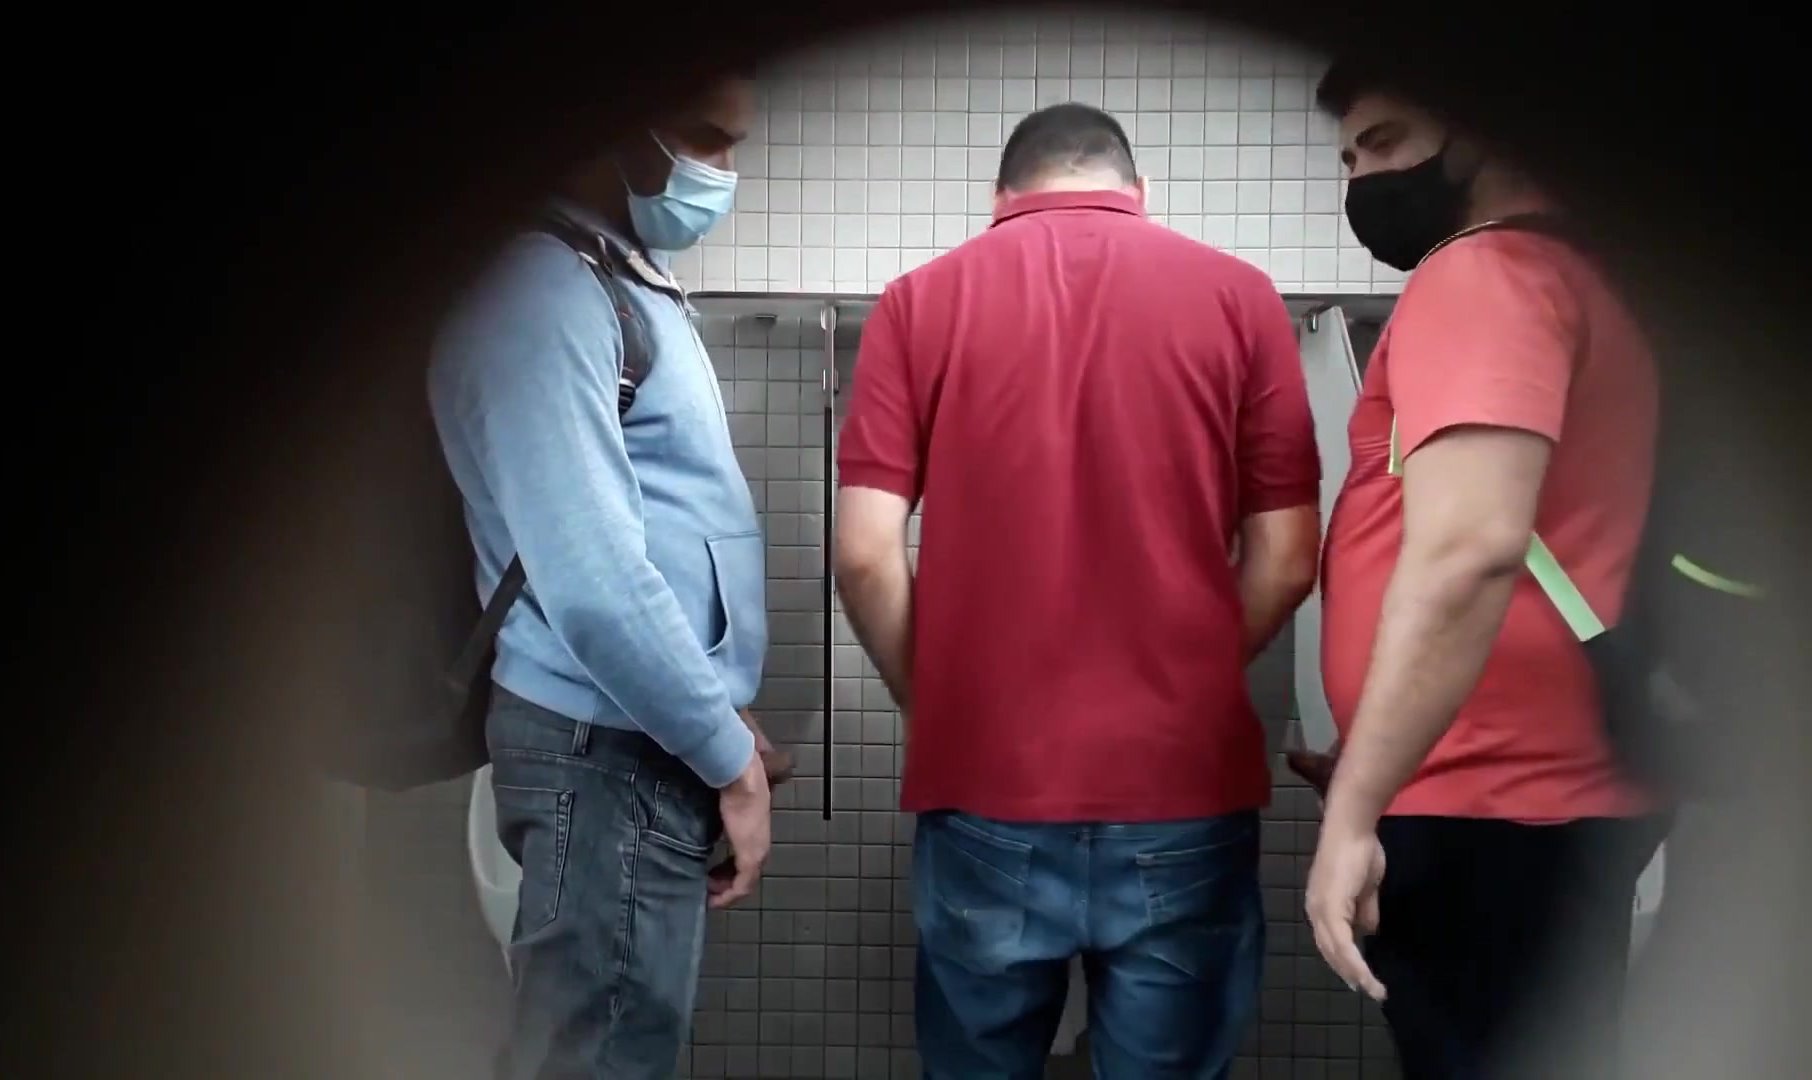 Real Action In Public Restroom